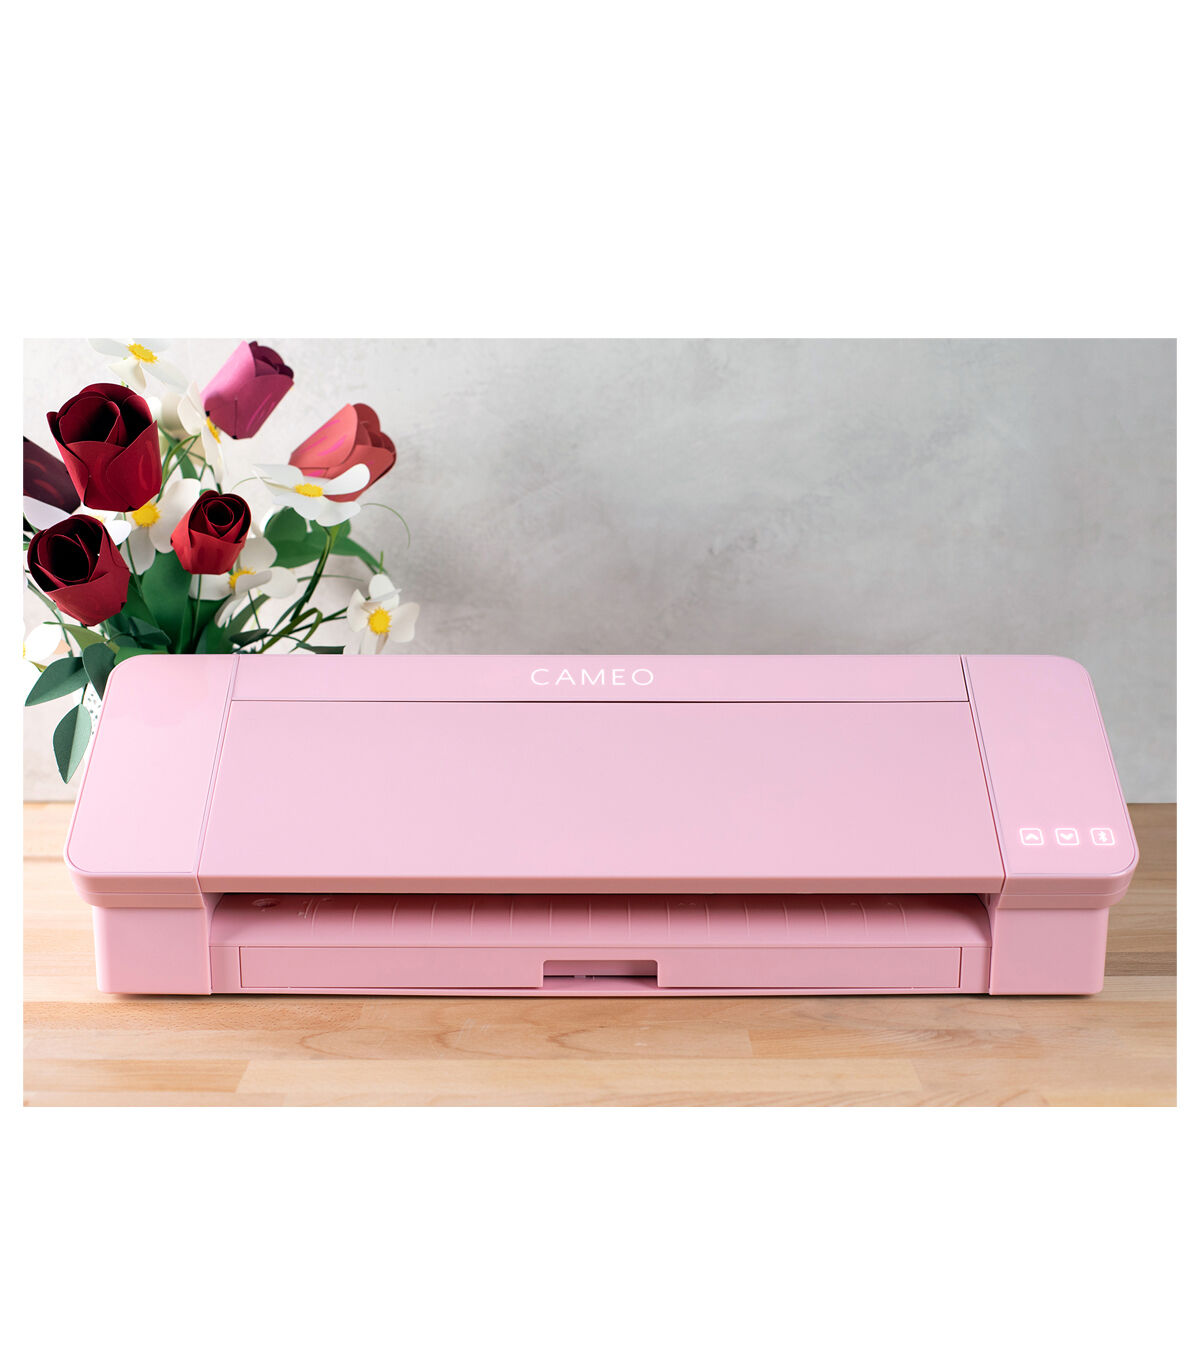 Silhouette Cameo 4 - Pink Ultimate Accessories Bundle